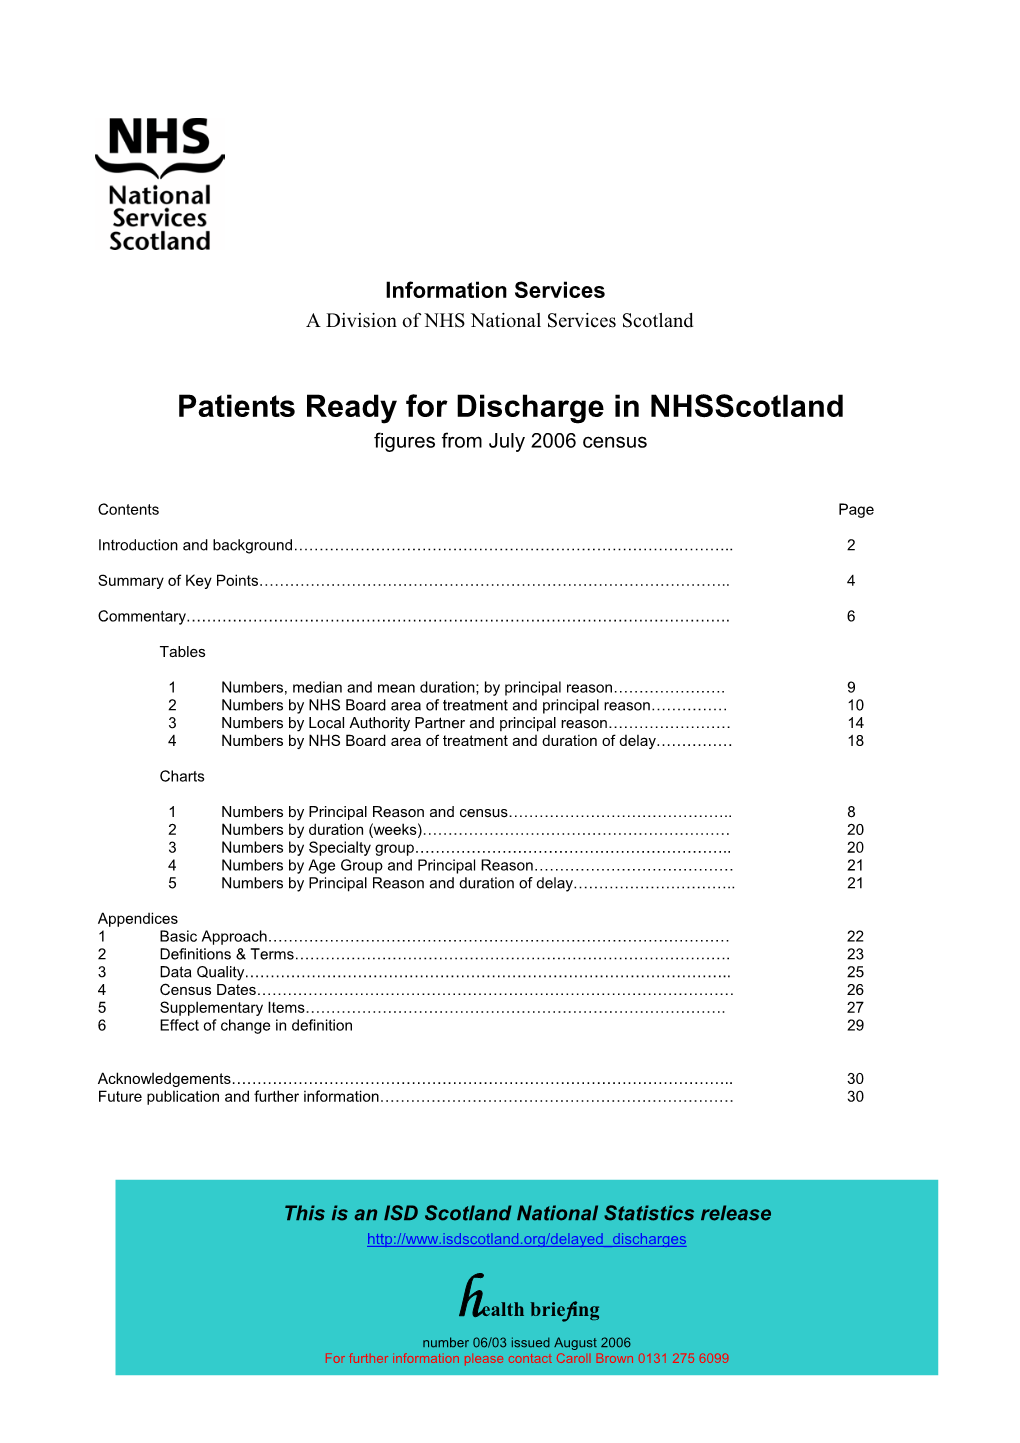 Patients Ready for Discharge in Nhsscotland Figures from July 2006 Census